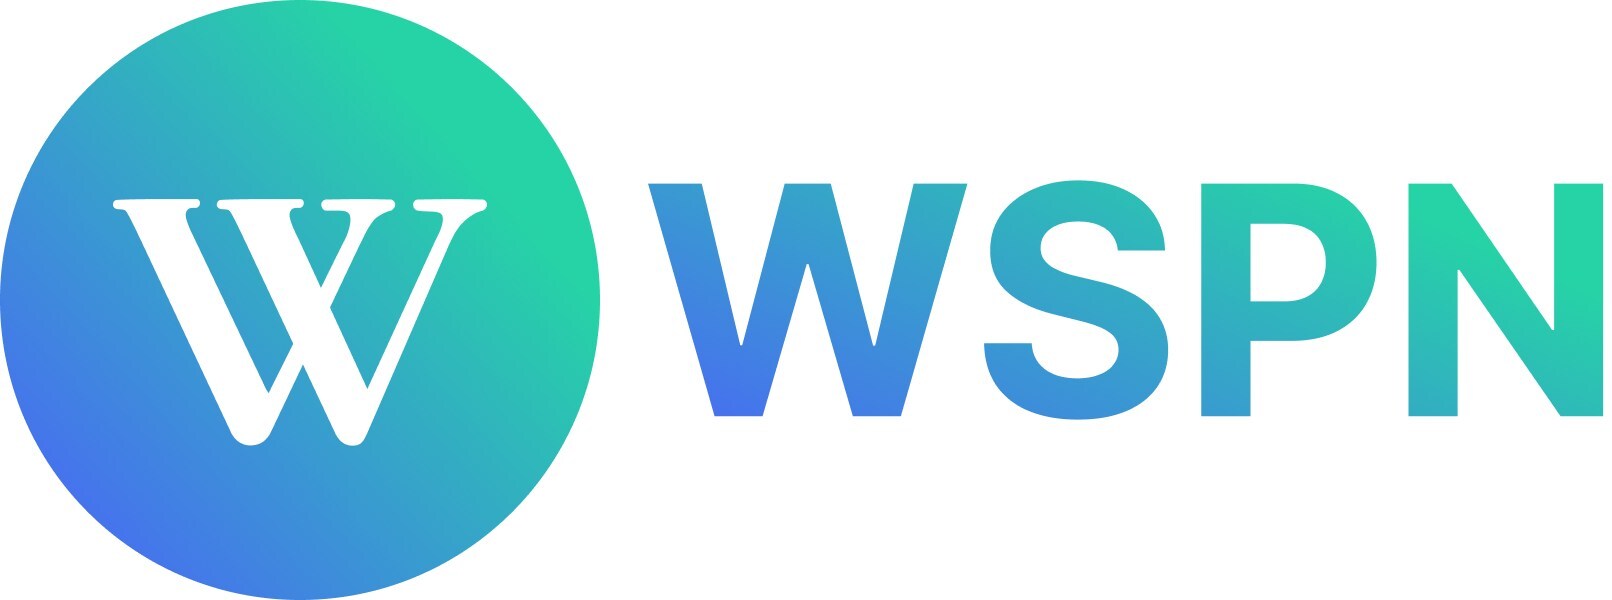 WSPN and Canza Finance Partner to Revolutionize Financial Services in Africa and Emerging Markets